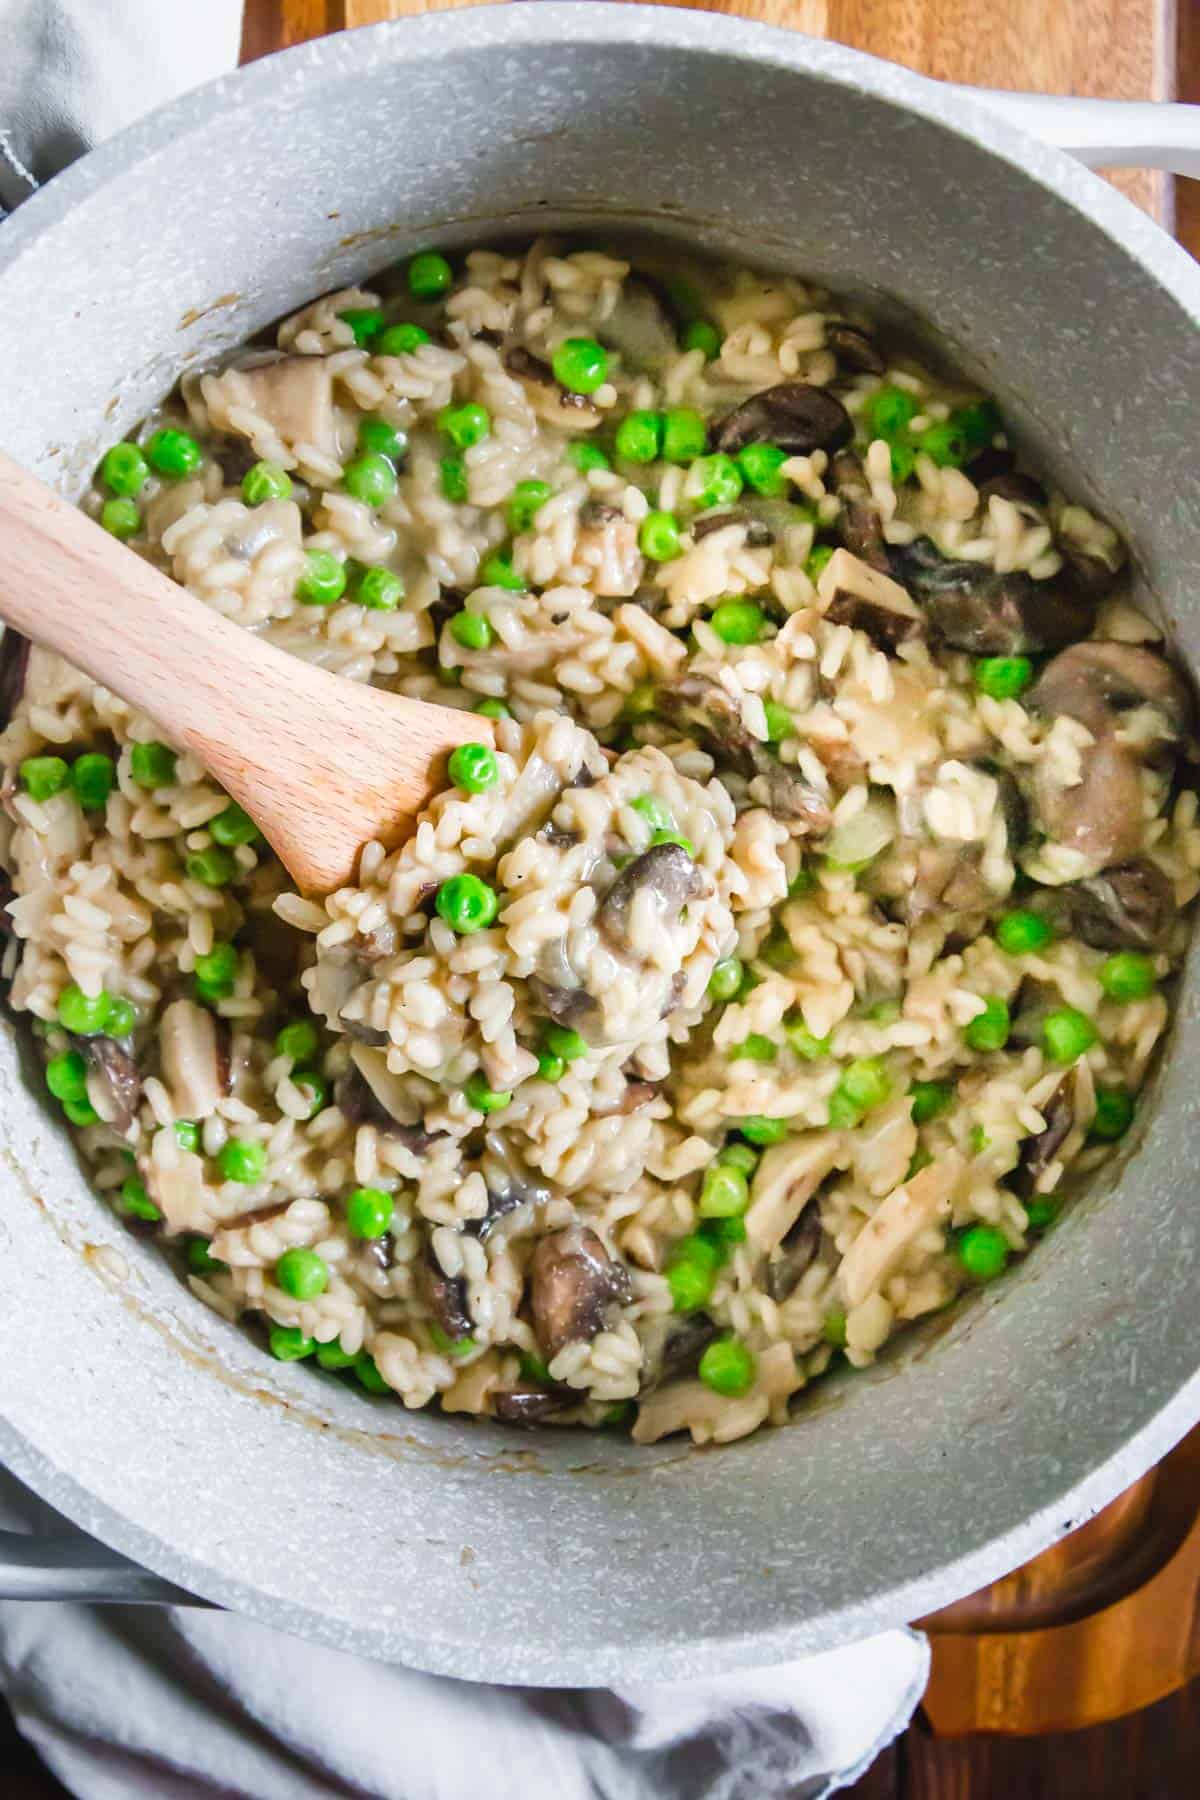 This vegan mushroom risotto with peas is insanely creamy and decadent without the use of any dairy! It's rich, comforting and packed with lots of umami flavors.